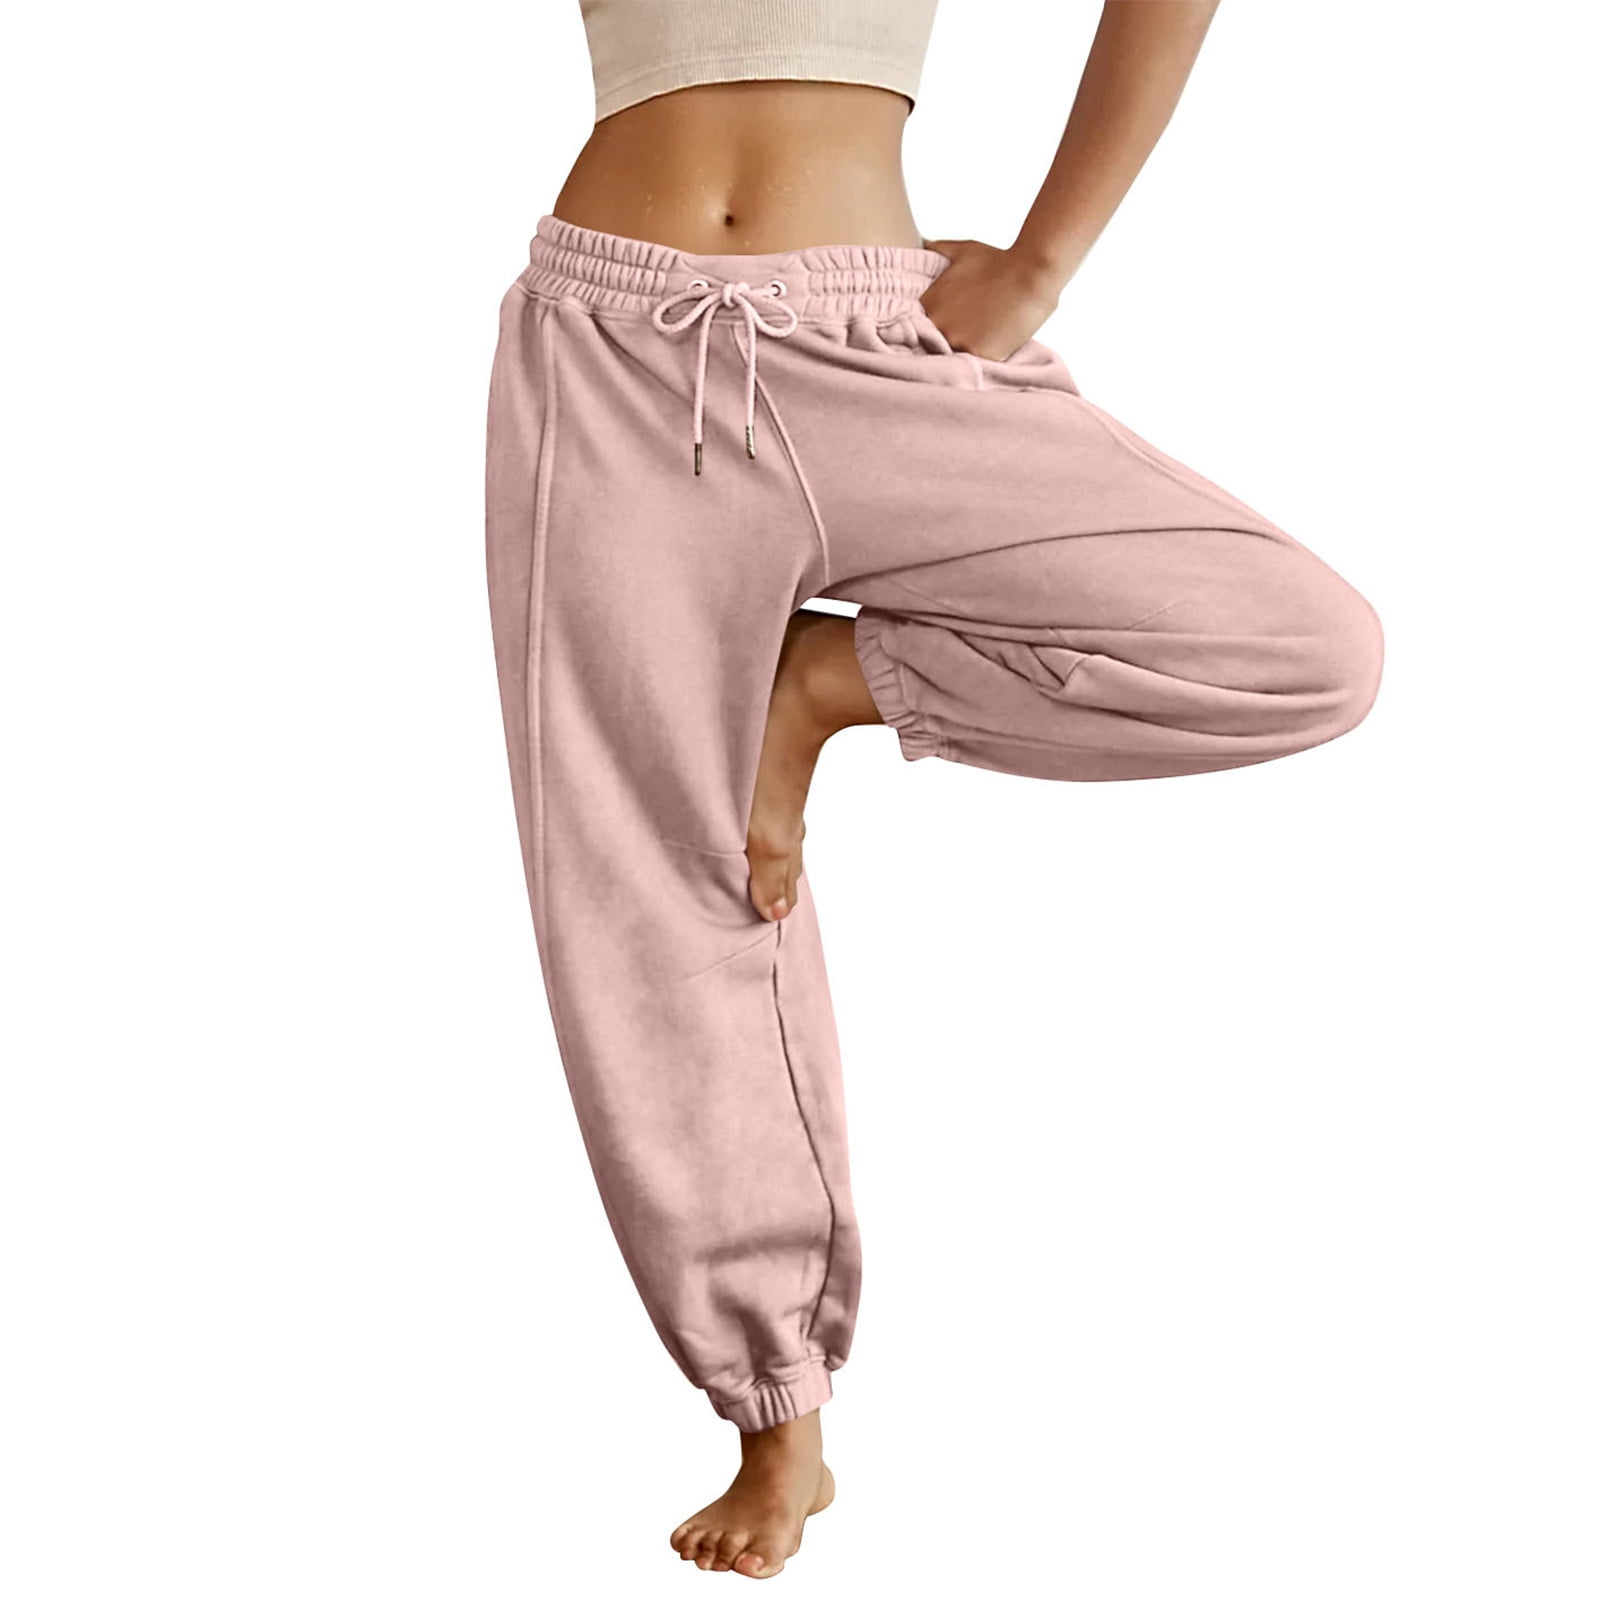  ECKHARDT Pink Tracksuit Pants Pink Yoga Pants 2000S Women's  Tights for Winter Sweater with Sweatpants Cropped Joggers Womens Fold Over  Waist Yoga Pants Cargo Pants Slim Winter Leggings Yoga Pants Set 